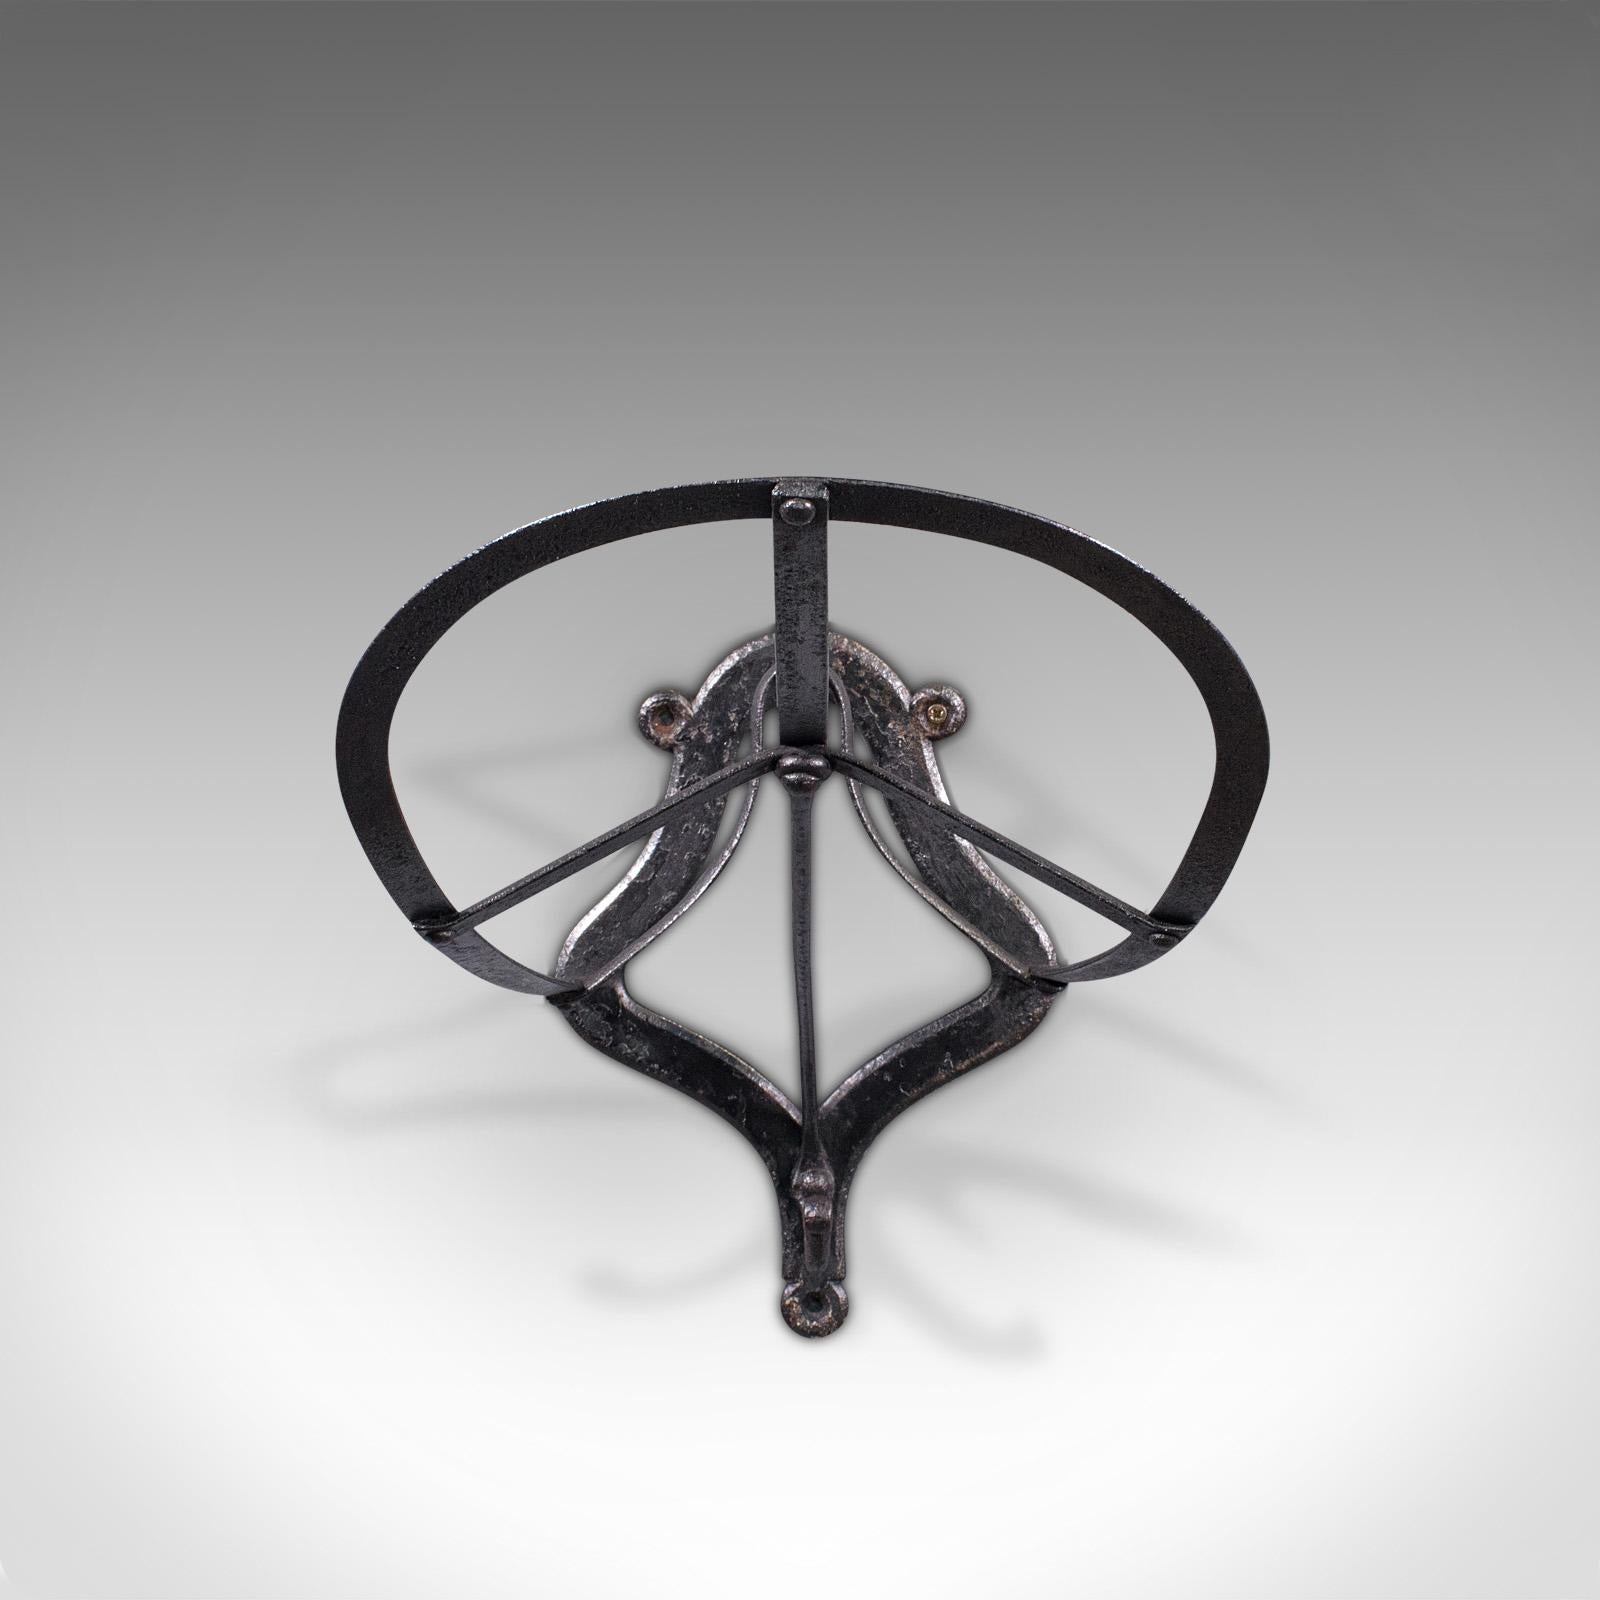 This is an antique saddle rack. An English, cast iron wall mounted equestrian tack rest, dating to the early Victorian period, circa 1850.

An attractive saddle rack as useful today as it was over 150 years ago
Displays a desirable aged patina